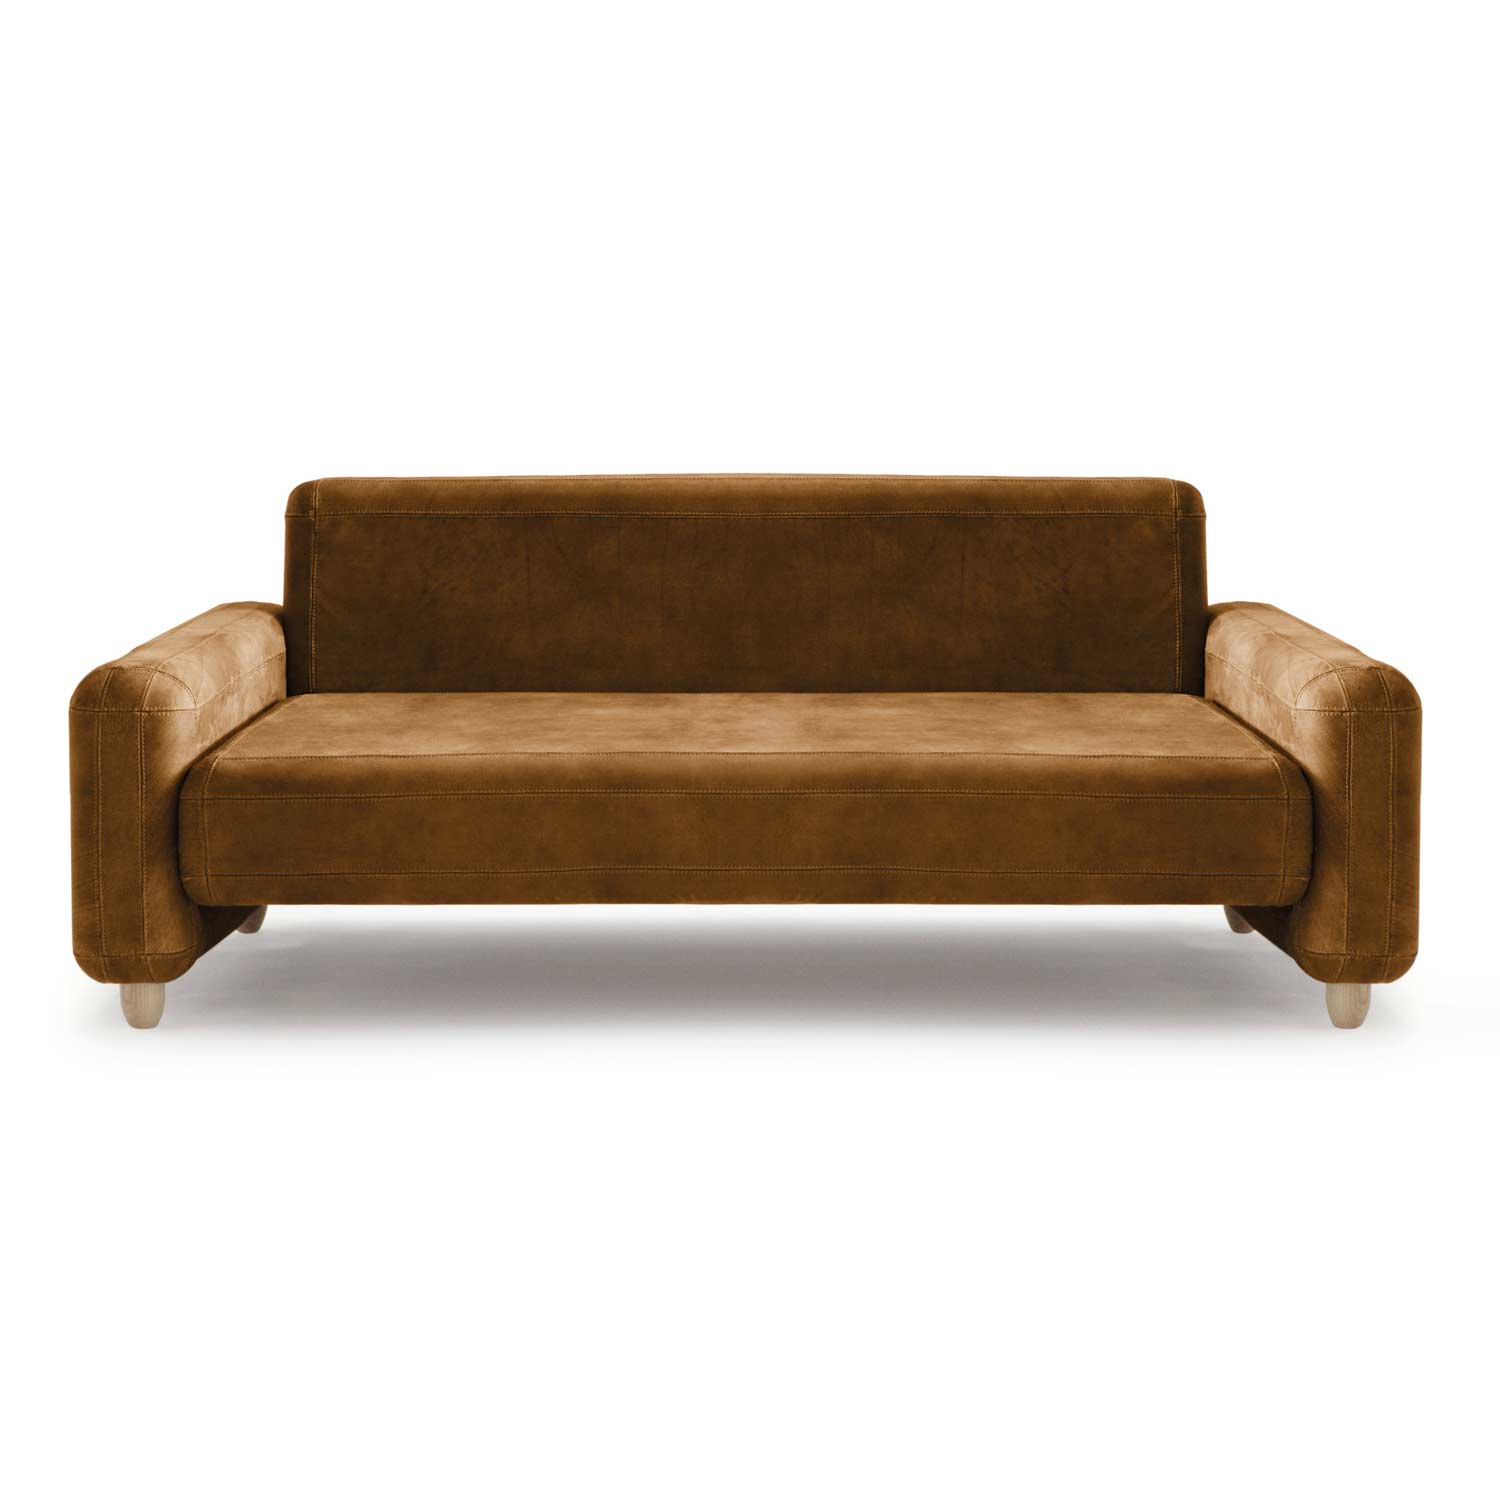 Comfortable Seating with Traco Series in cognac leather